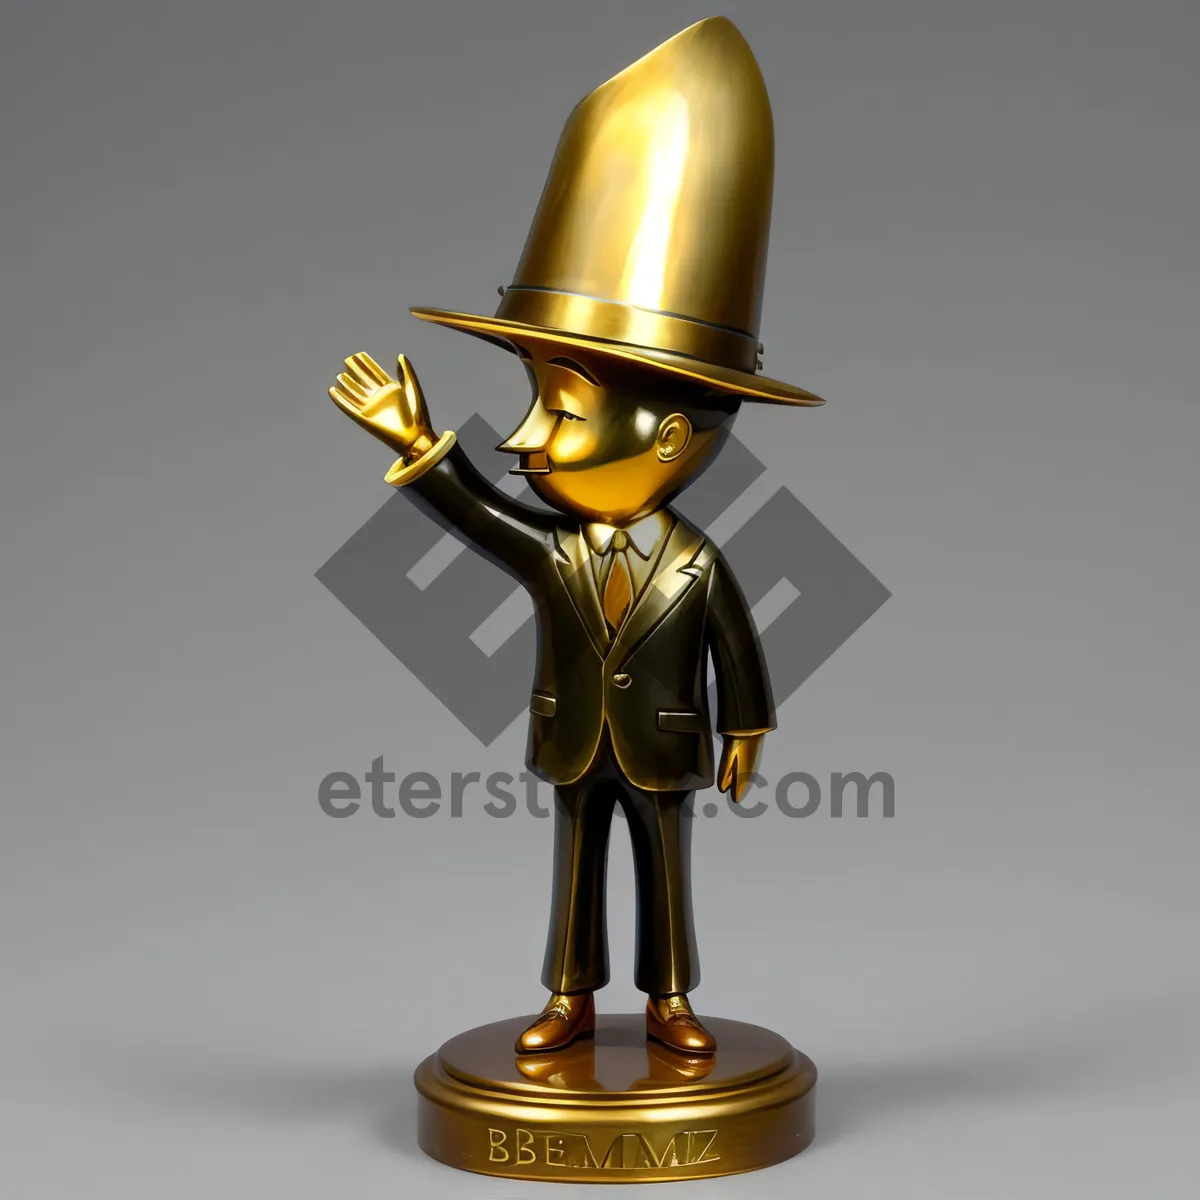 Picture of Golden Chess Figure in 3D